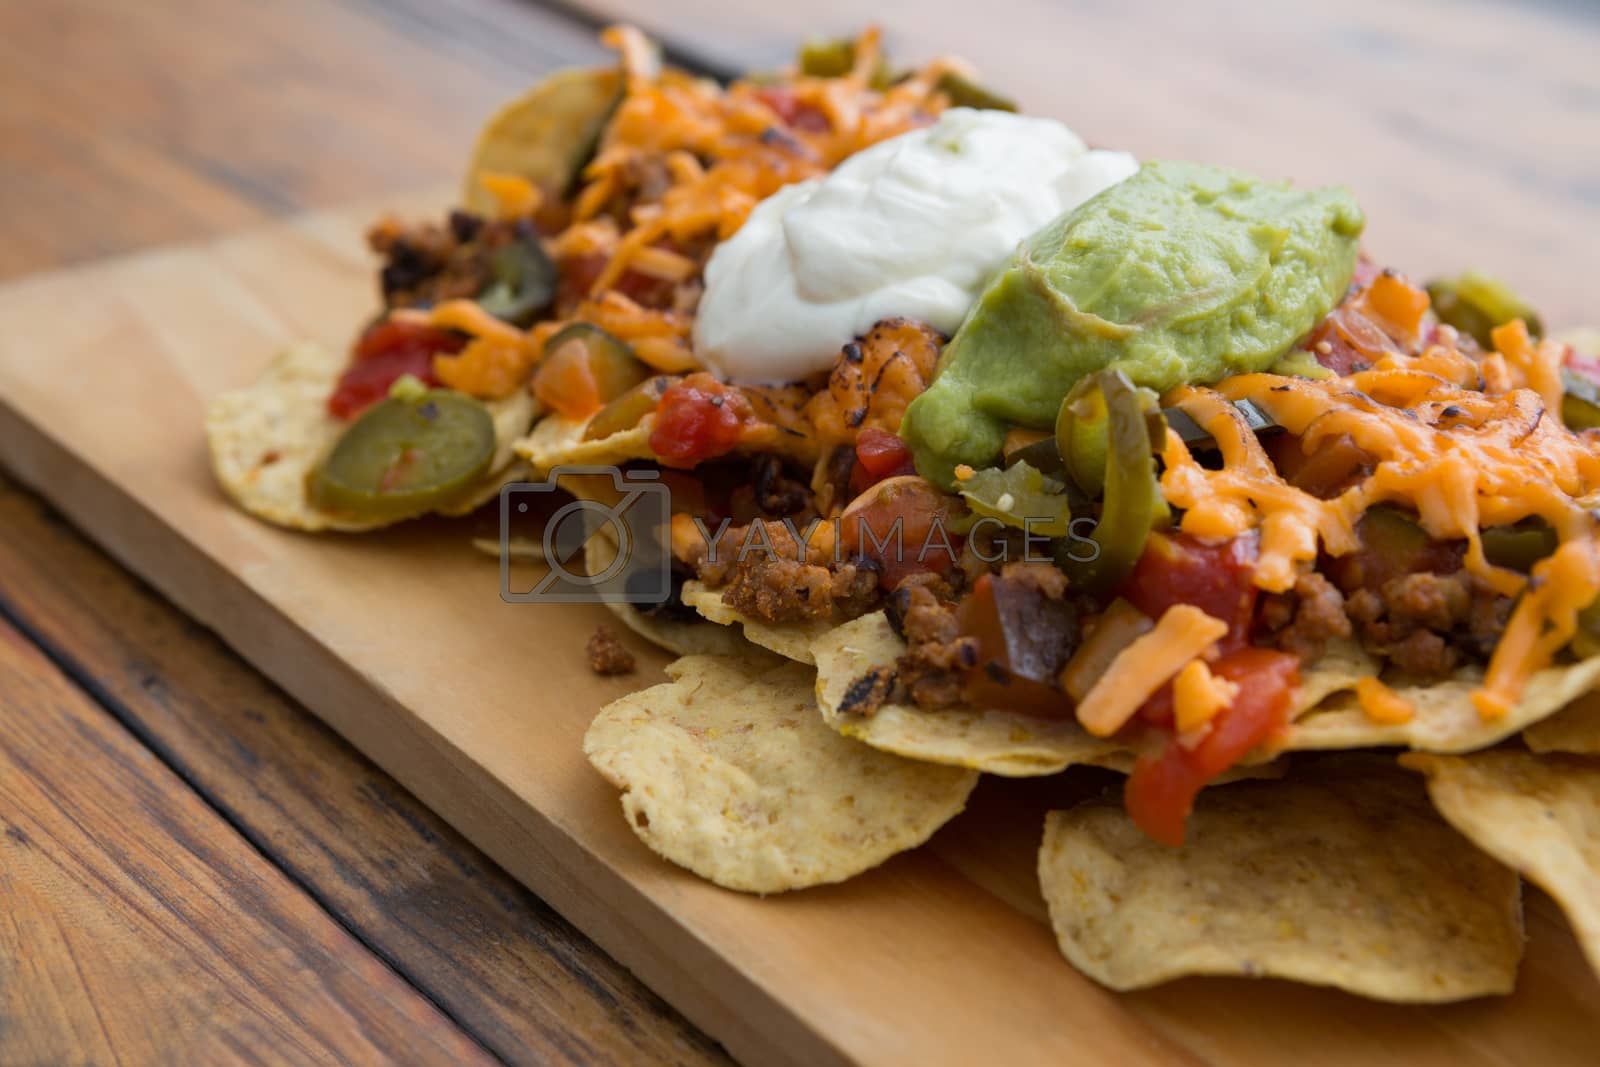 Royalty free image of Various mexican food by Wavebreakmedia